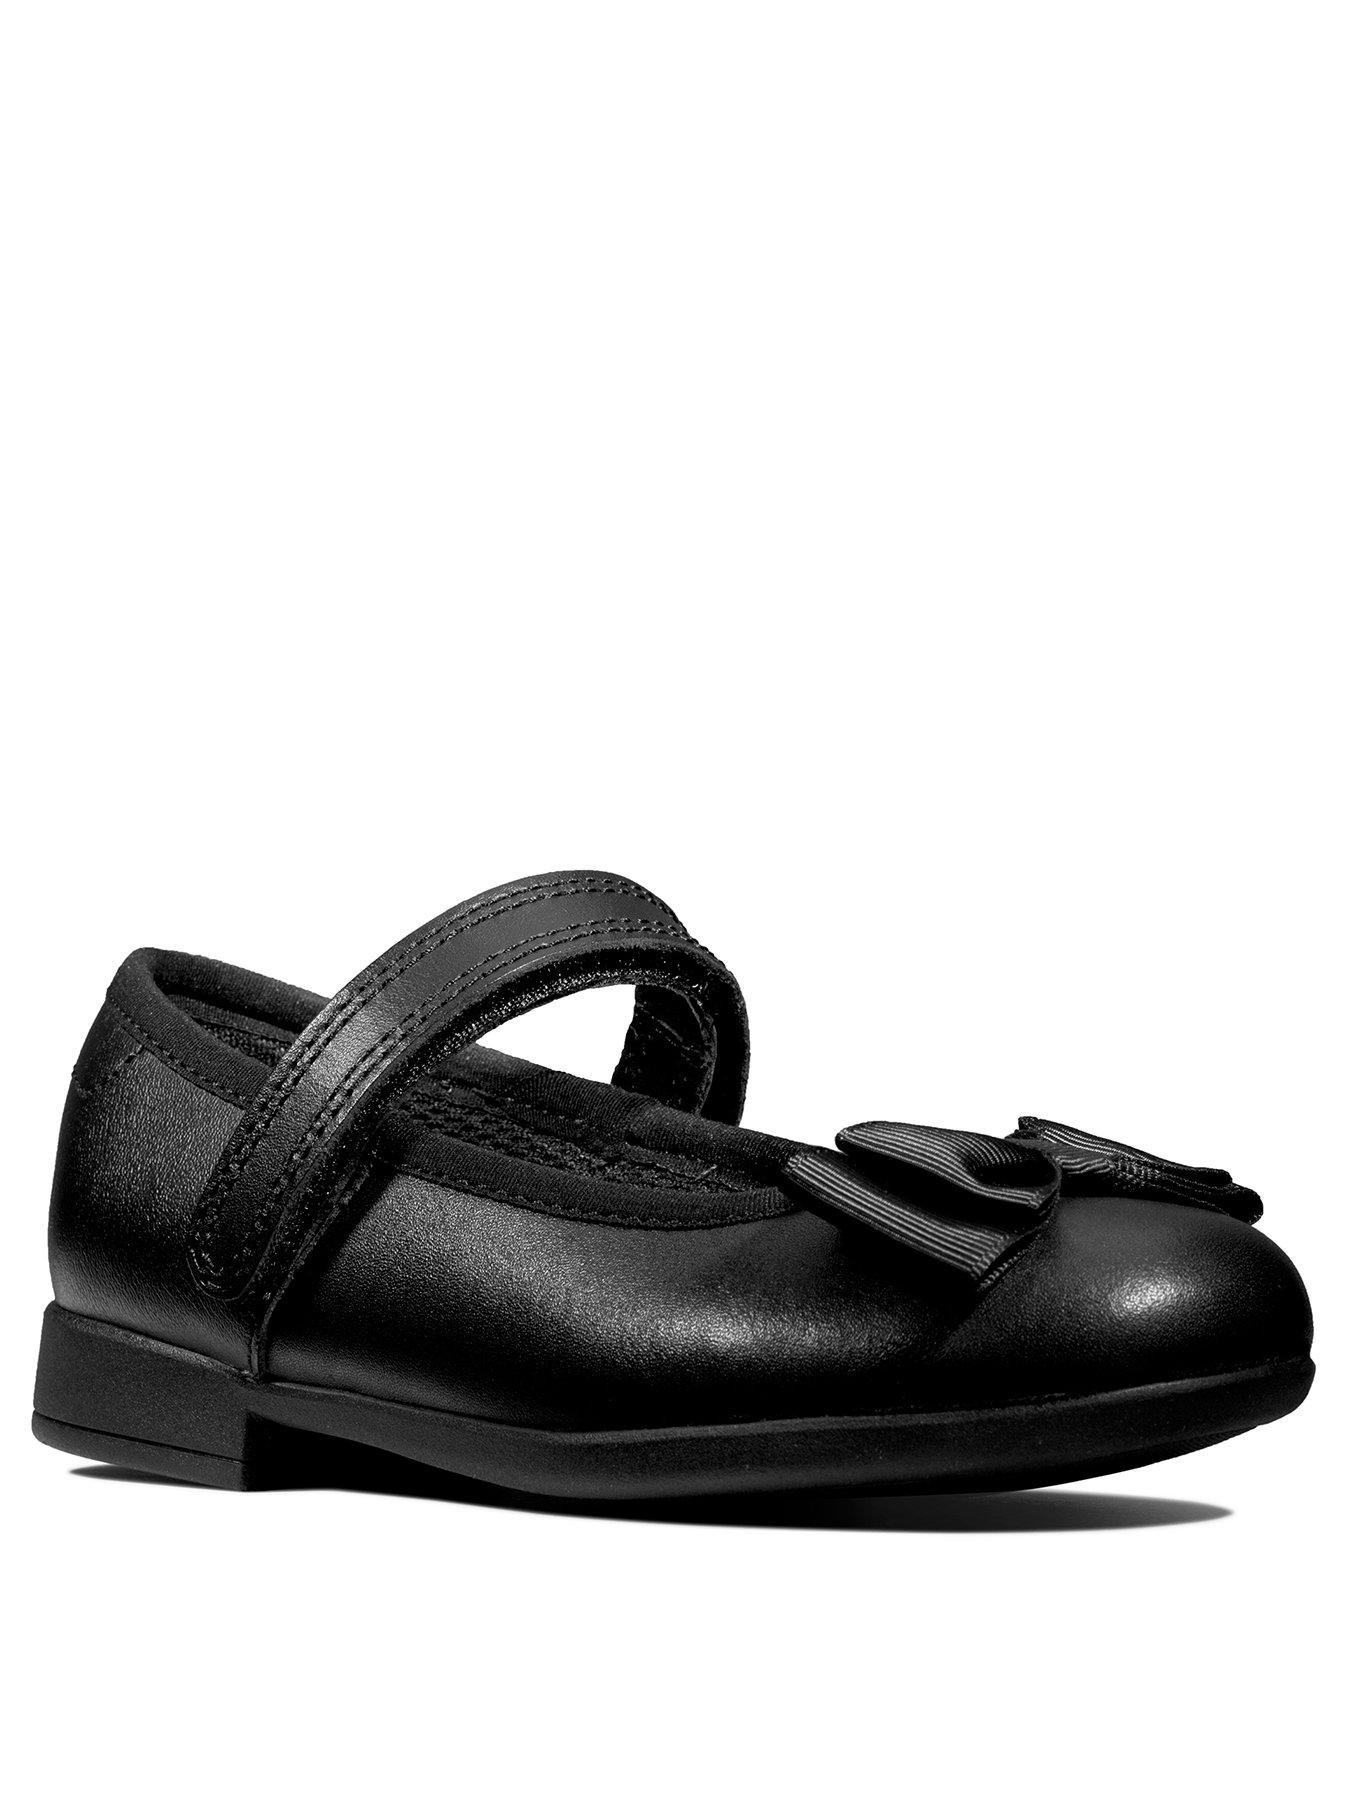 Boys' Wide Width and Extra Wide Width Shoes